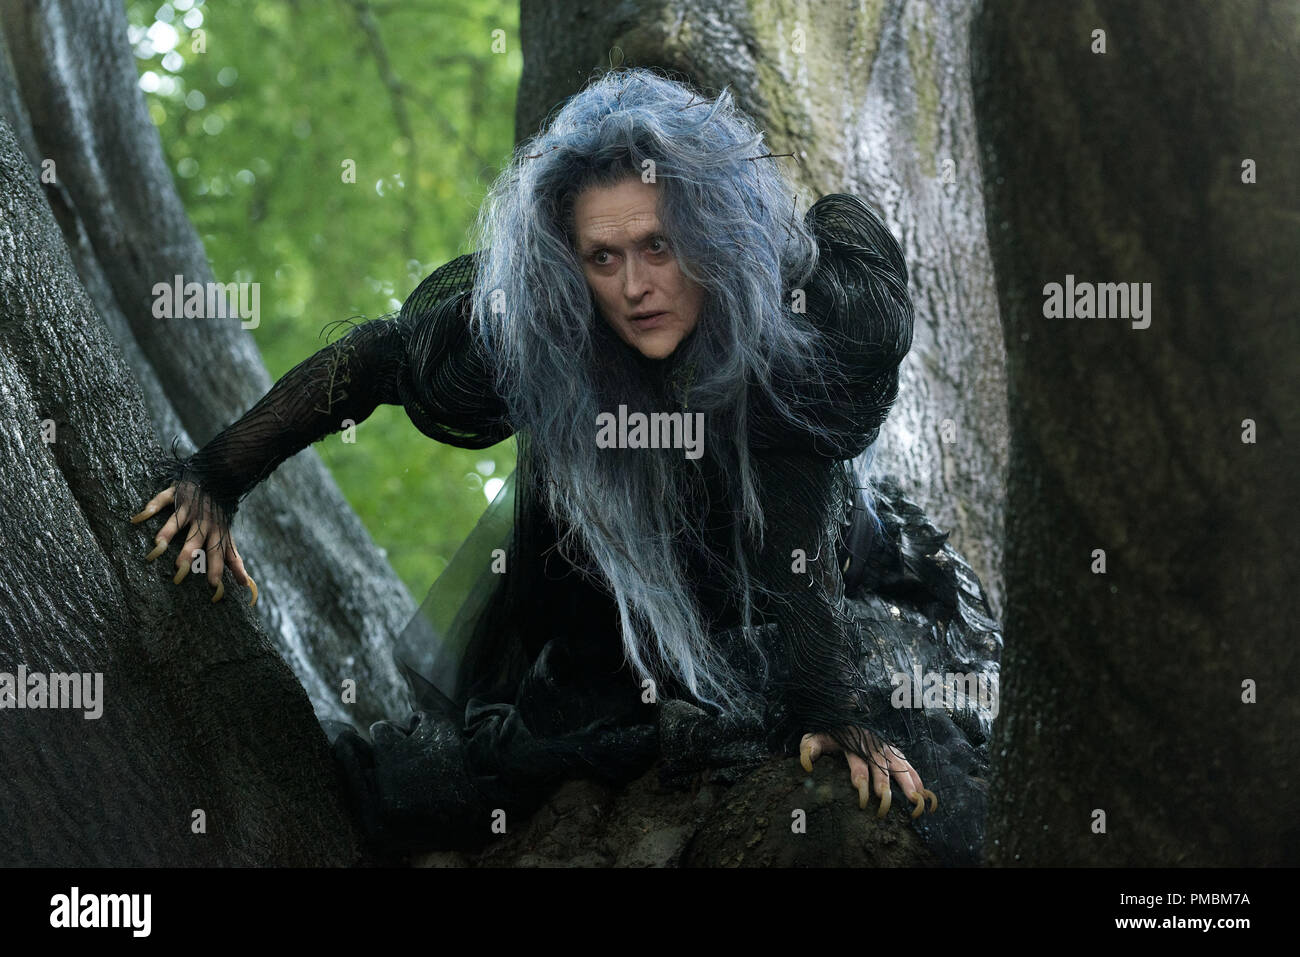 Meryl Streep ventures 'Into the Woods' as the Witch who wishes to reverse a curse so that her beauty may be restored. Stock Photo